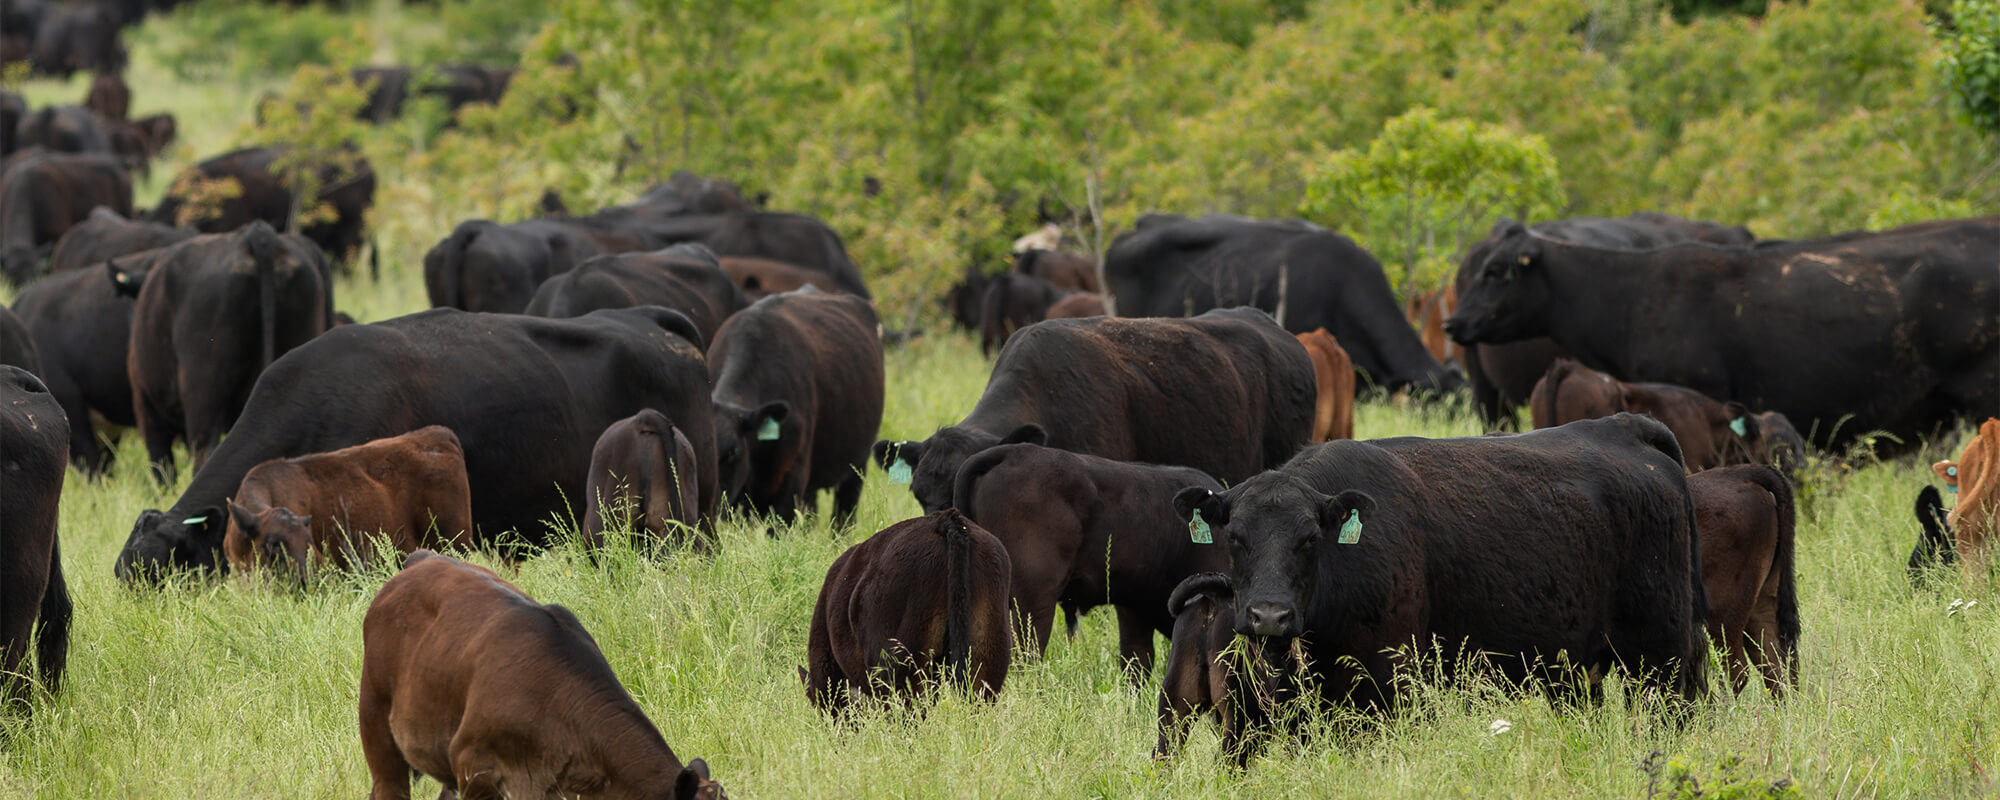 Cattle grazing in pasture.